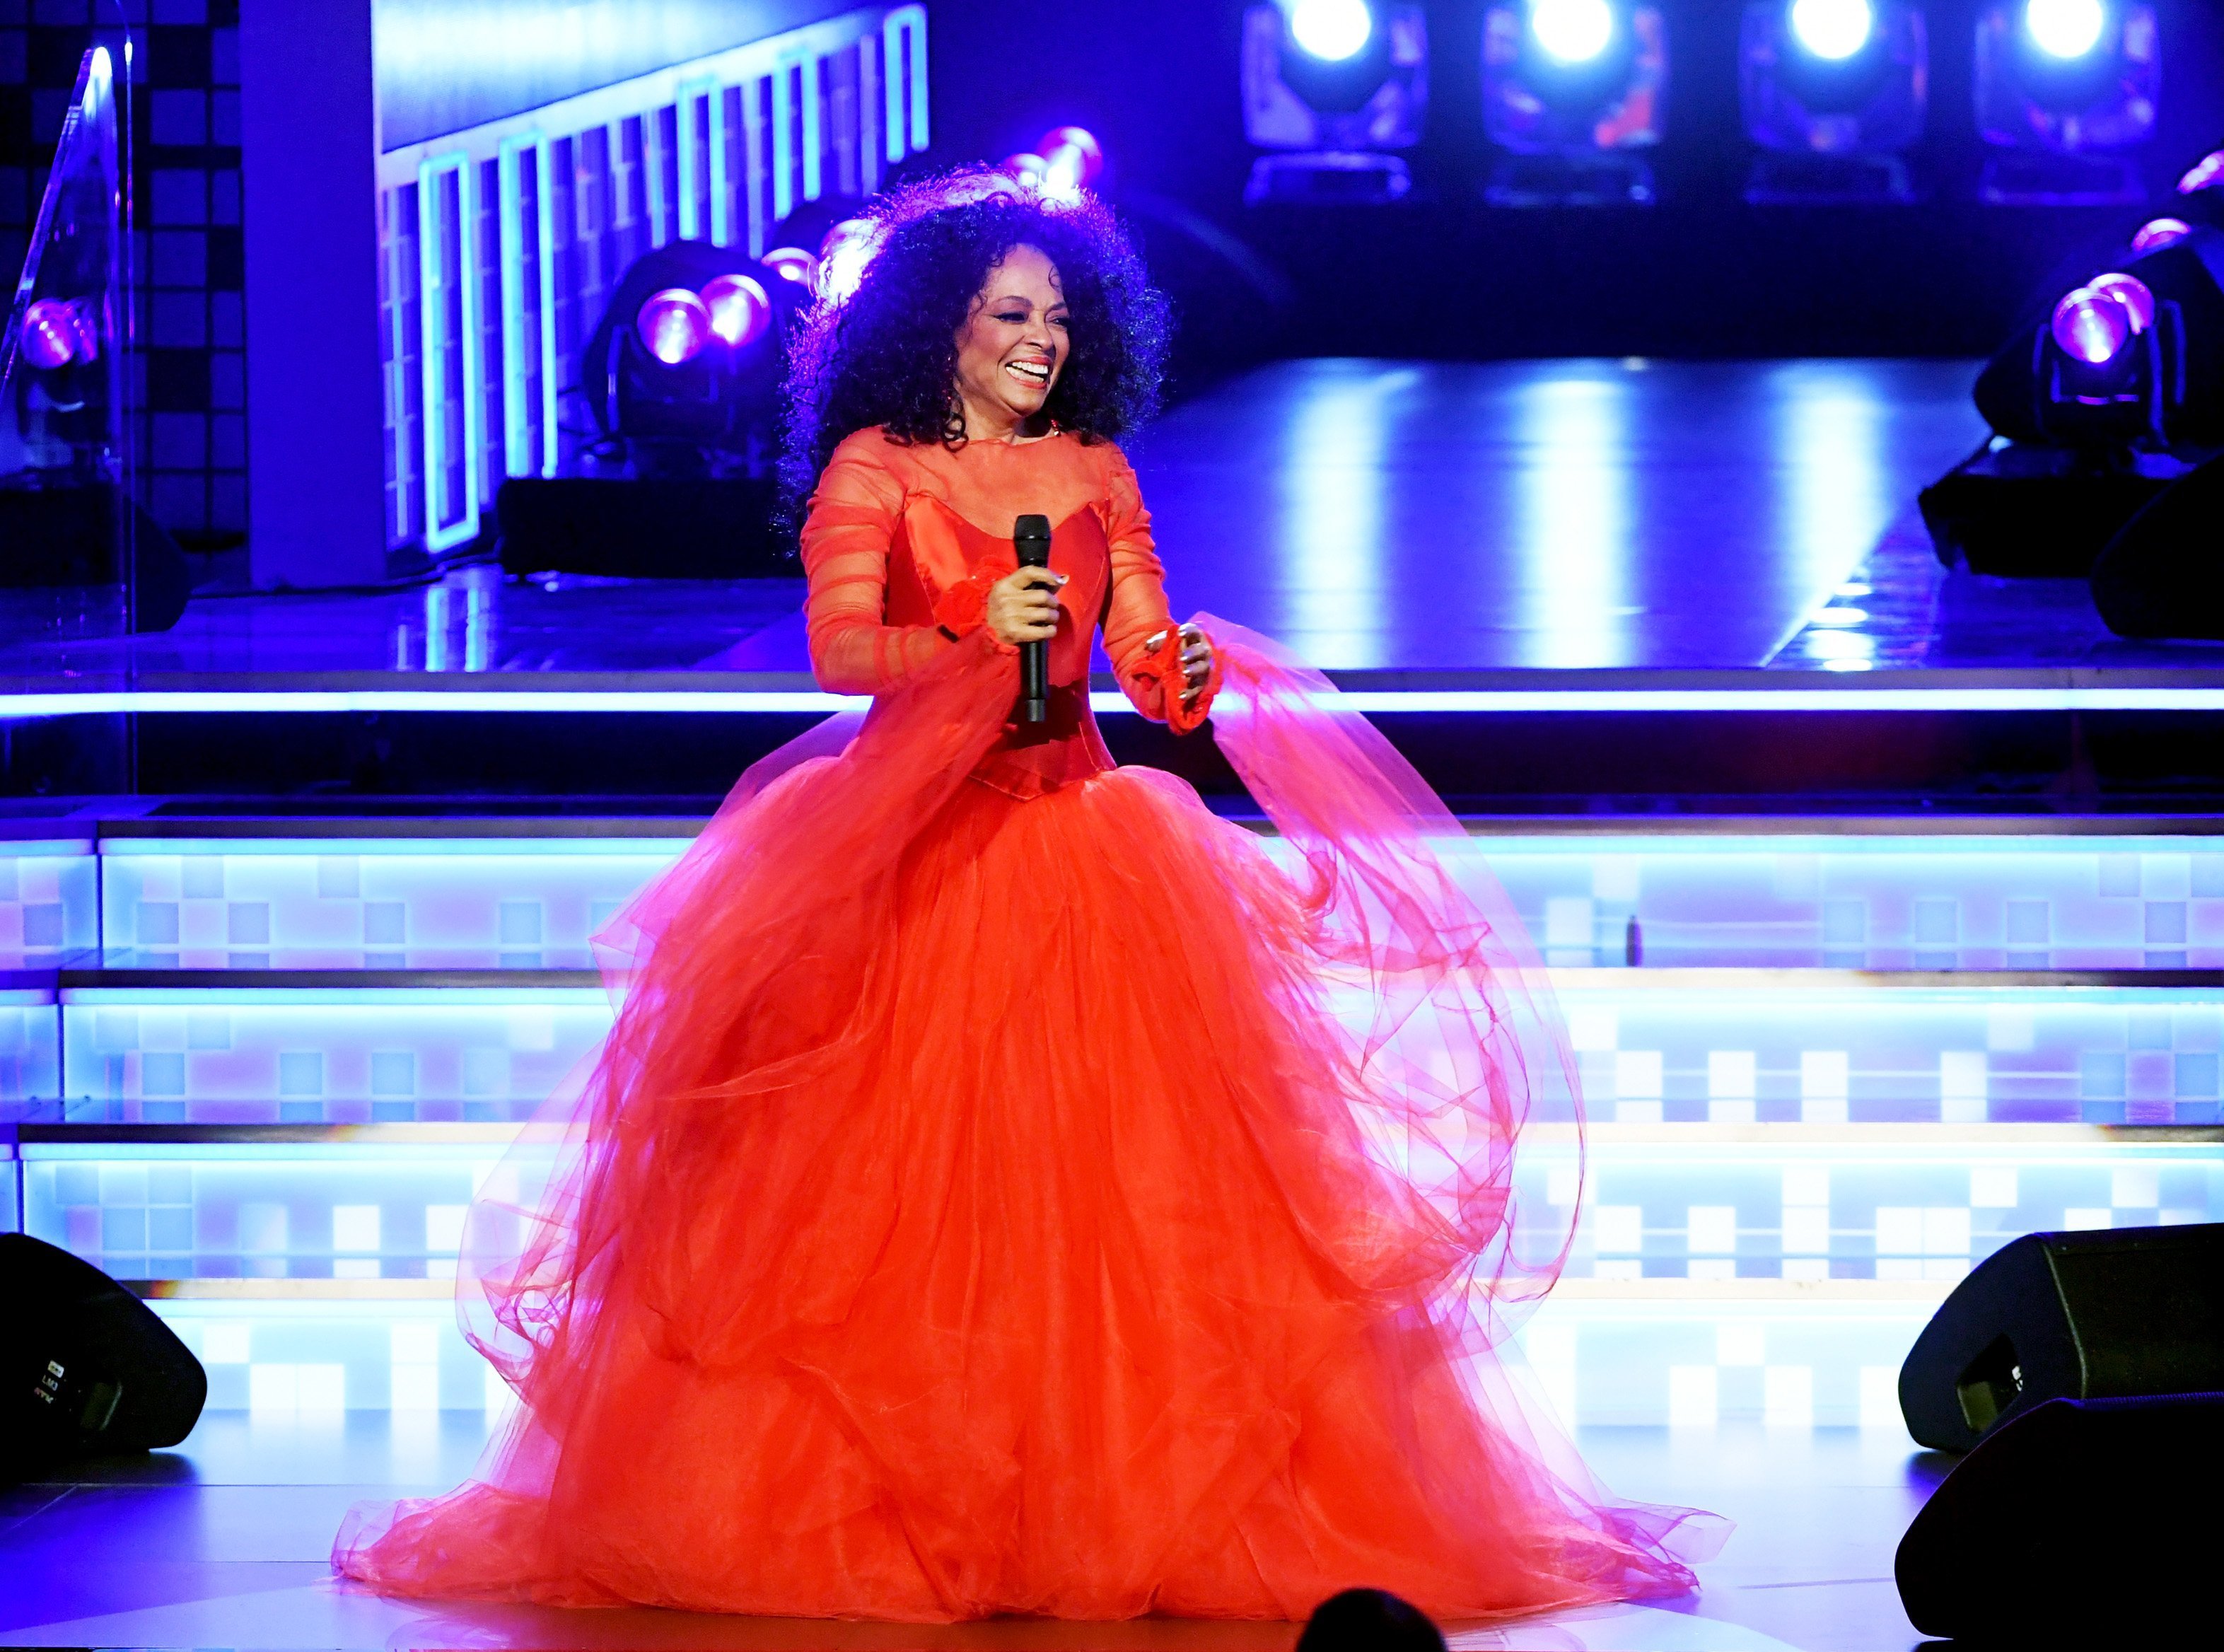 Diana Ross during her birthday performance at the 61st Annual GRAMMY Awards in Los Angeles on Feb. 10, 2019. | Photo: Getty Images